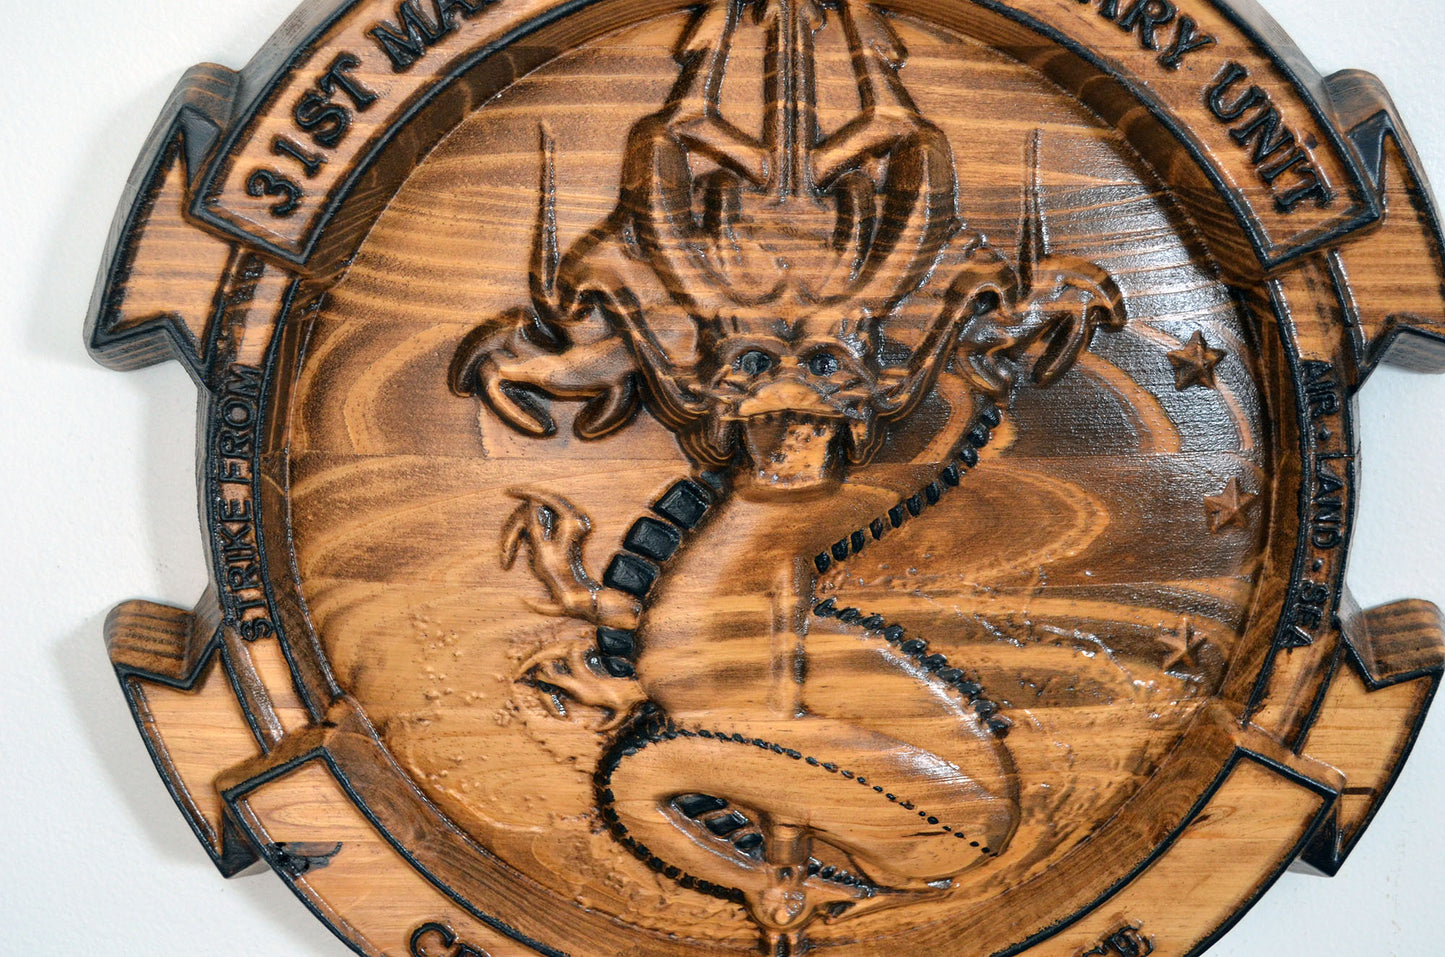 USMC 31st Marine Expeditionary Unit, stained 3d wood carving, military plaque